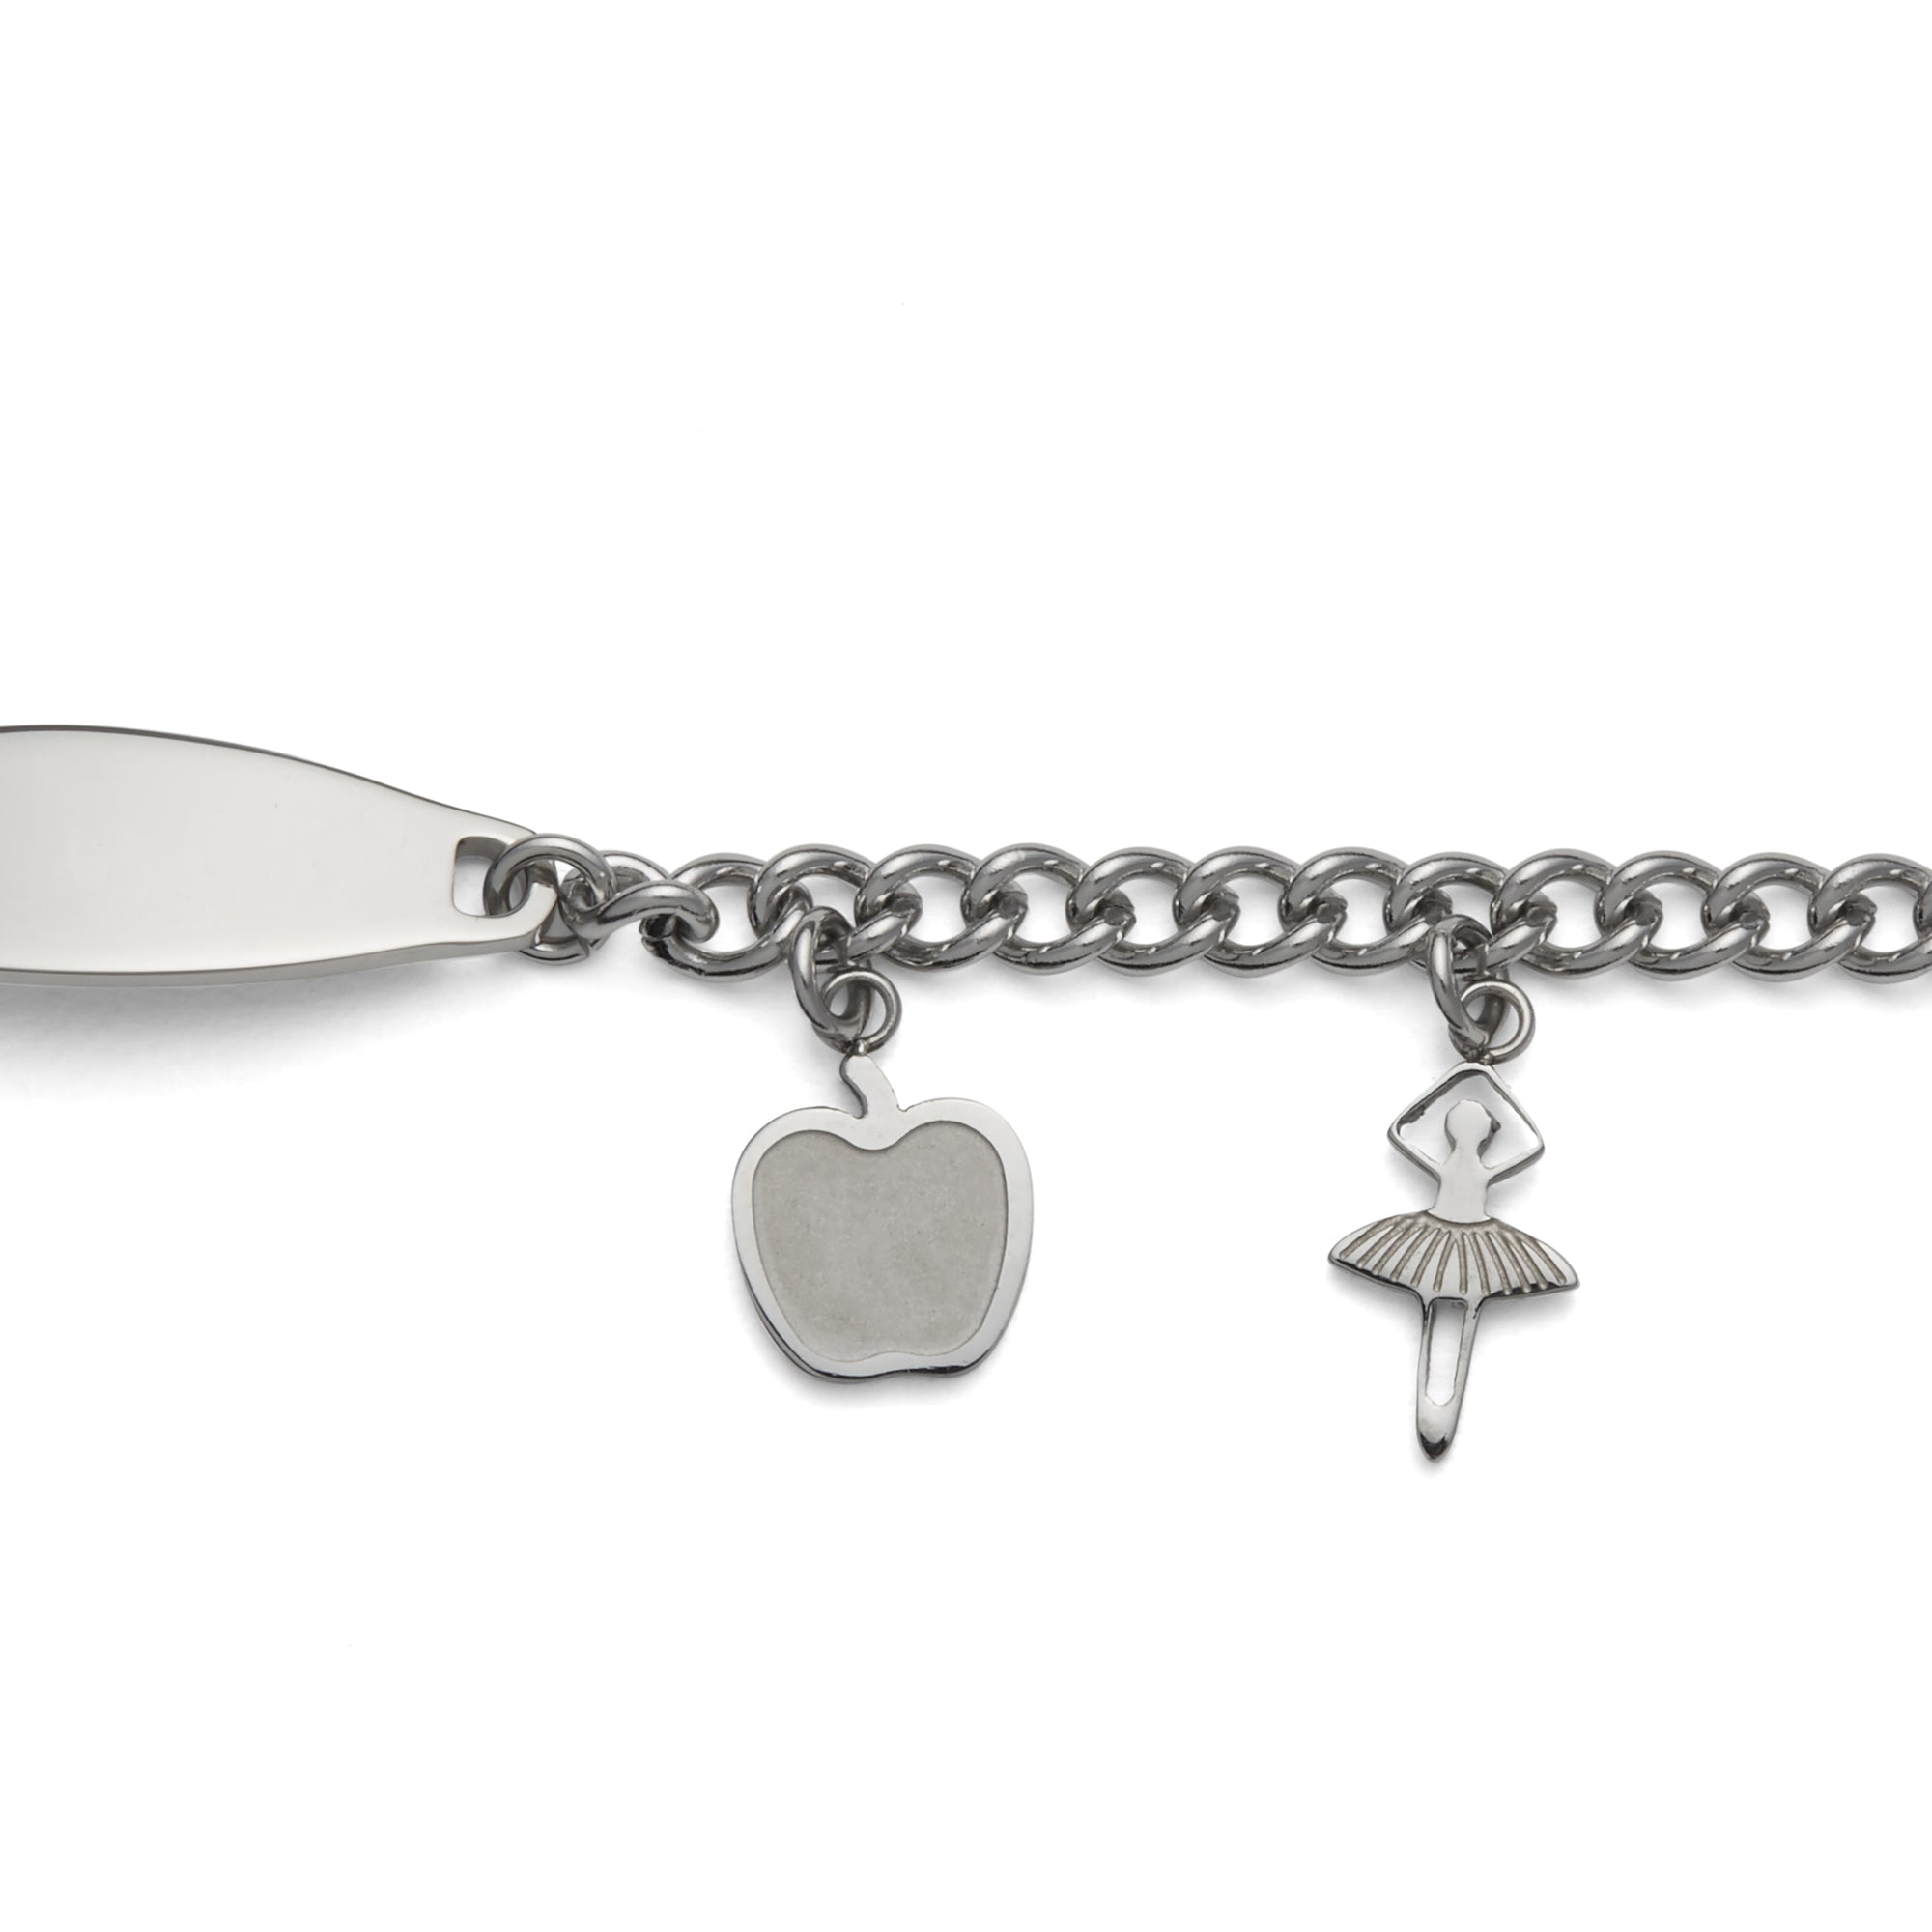 Speidel Children's ID Bracelet with Plaque and Flower Charms